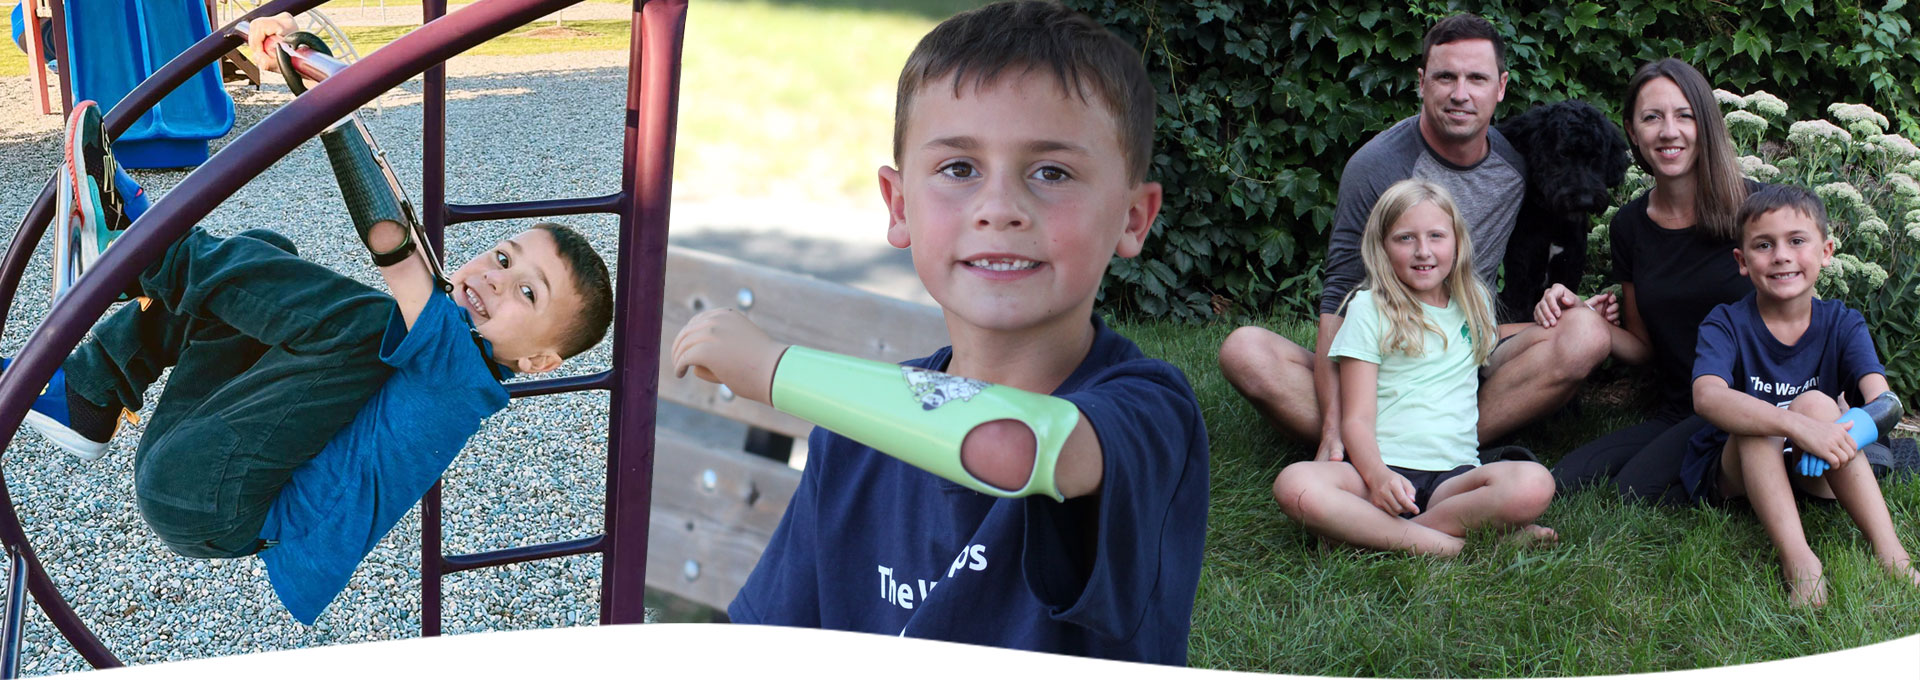 A photo collage of Abel, a young arm amputee, using his artificial limb to participate in activities like basketball and playing at the playground.